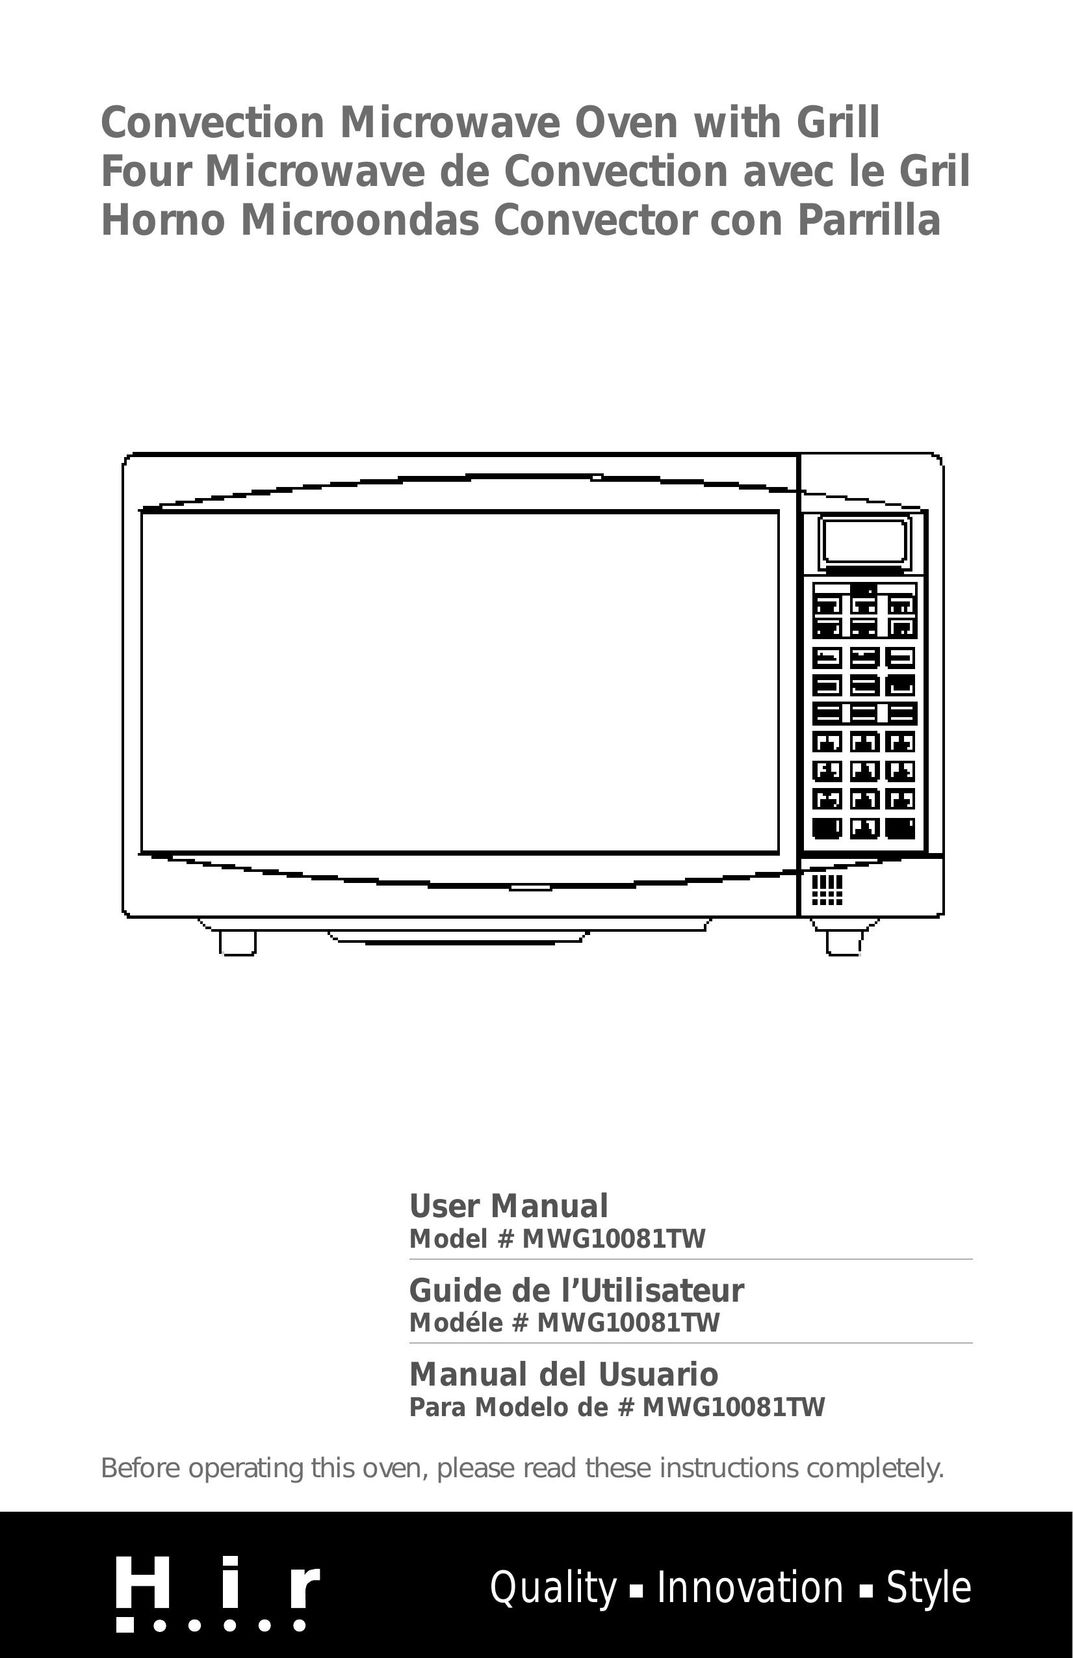 Haier MWG10081TW Convection Oven User Manual